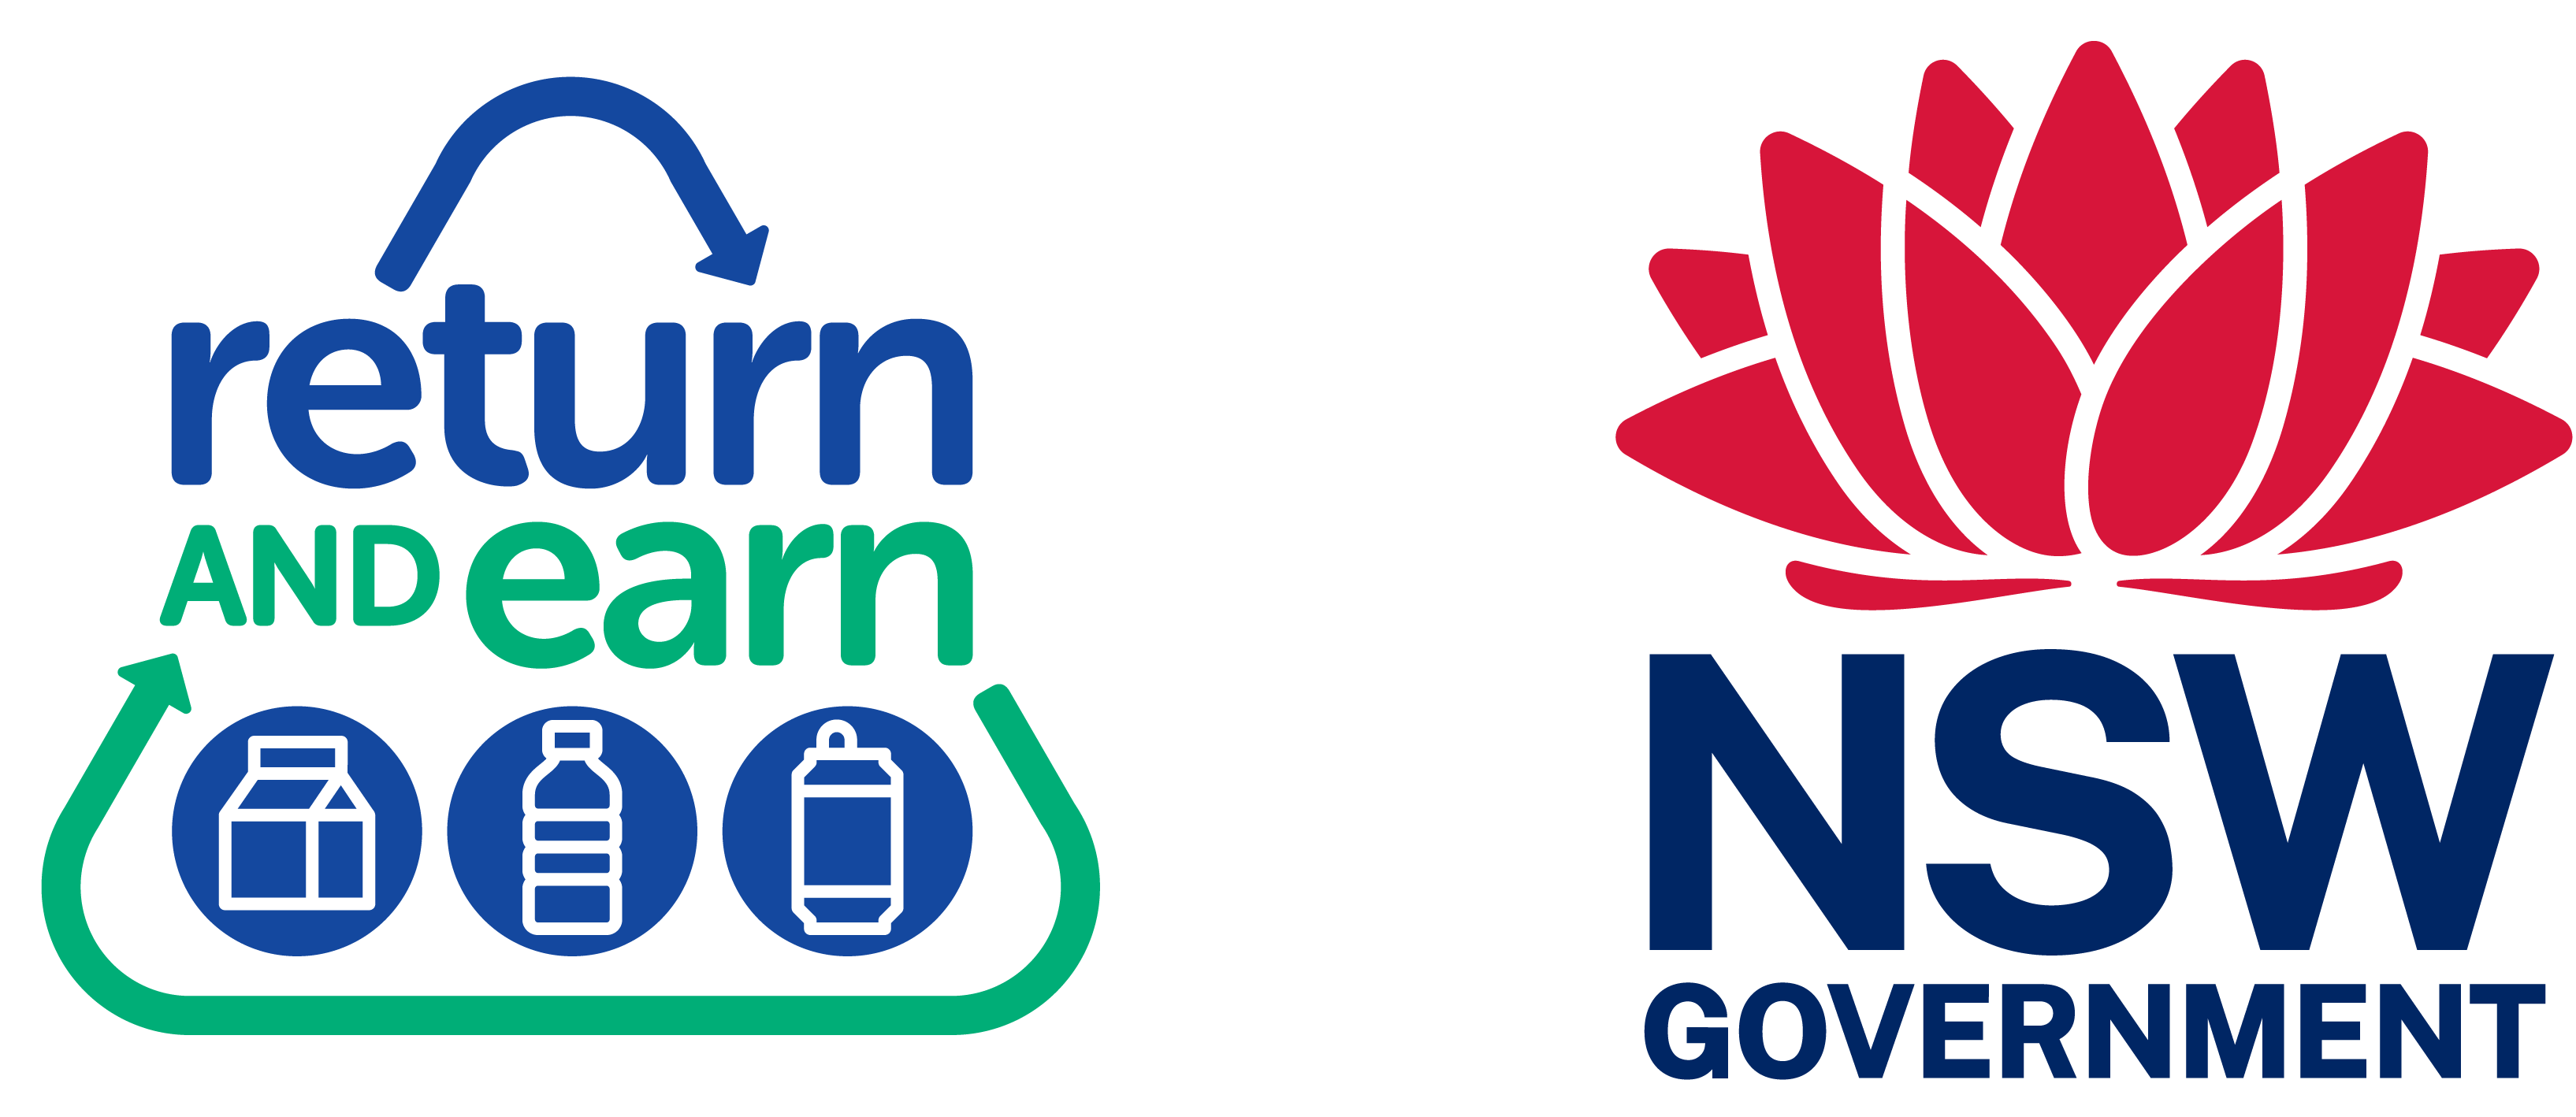 Home - Return and earn Logo and NSW Government logo